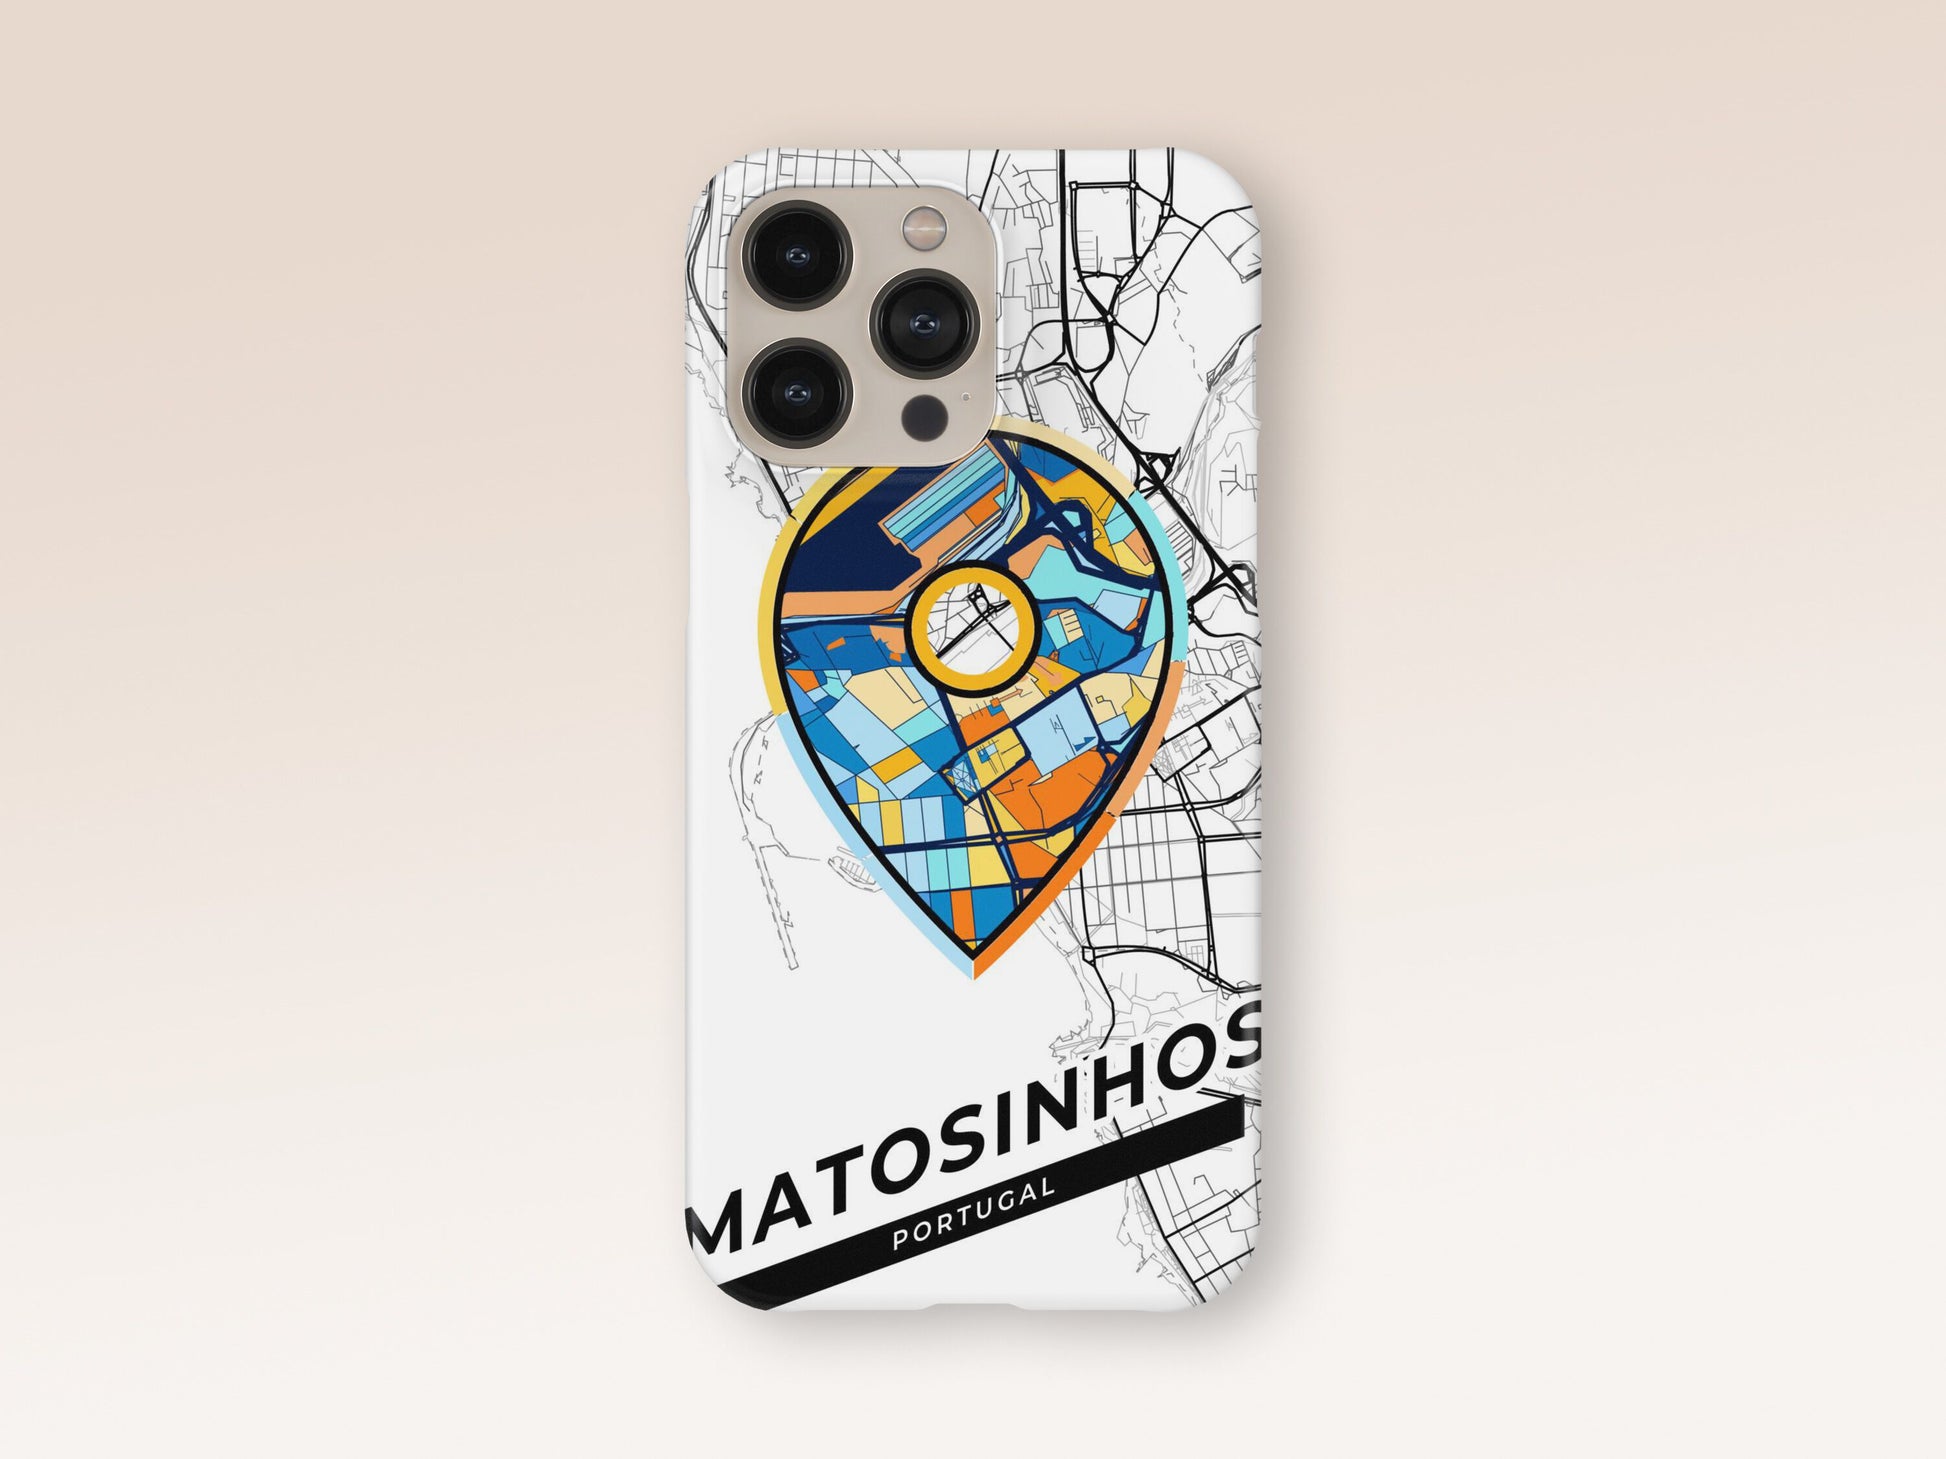 Matosinhos Portugal slim phone case with colorful icon. Birthday, wedding or housewarming gift. Couple match cases. 1